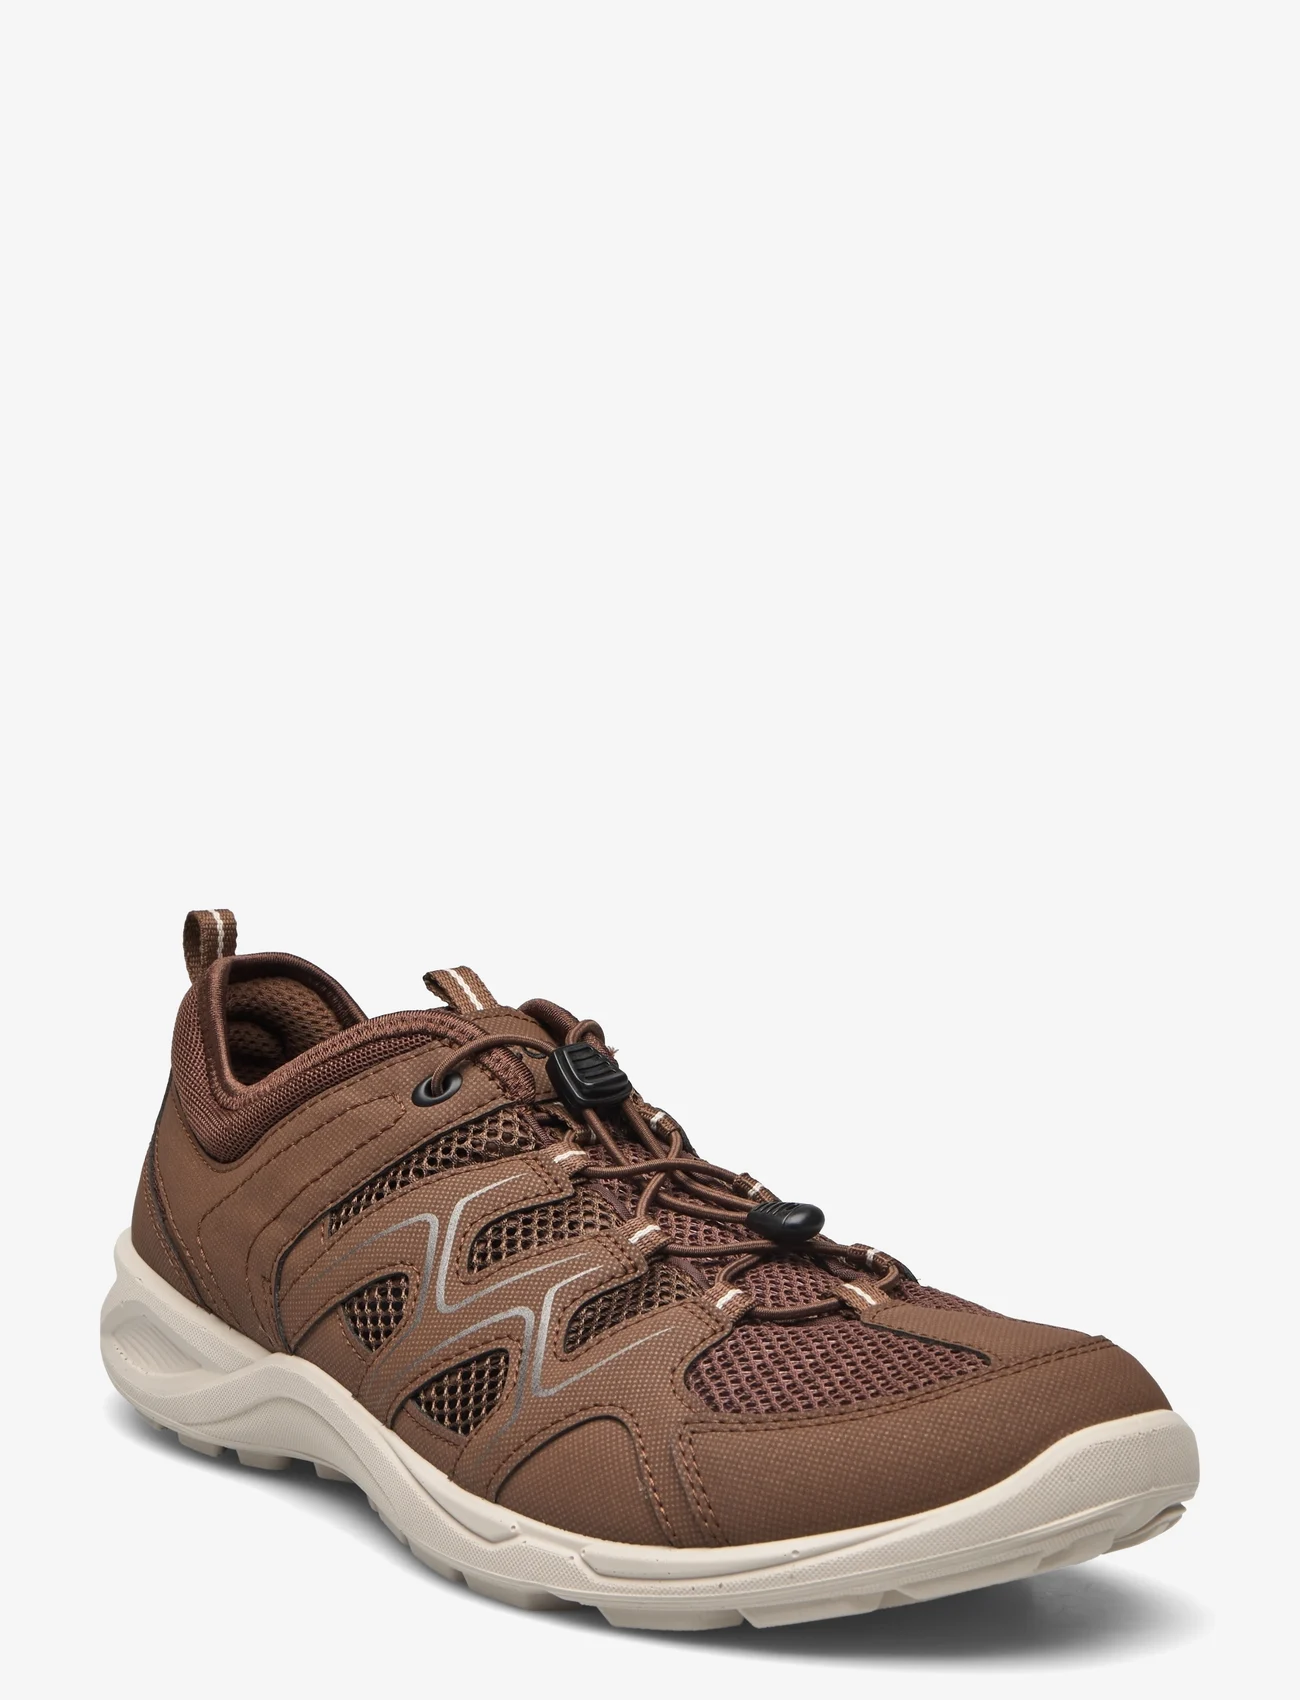 ECCO - TERRACRUISE LT M - hiking shoes - cocoa brown/cocoa brown - 0